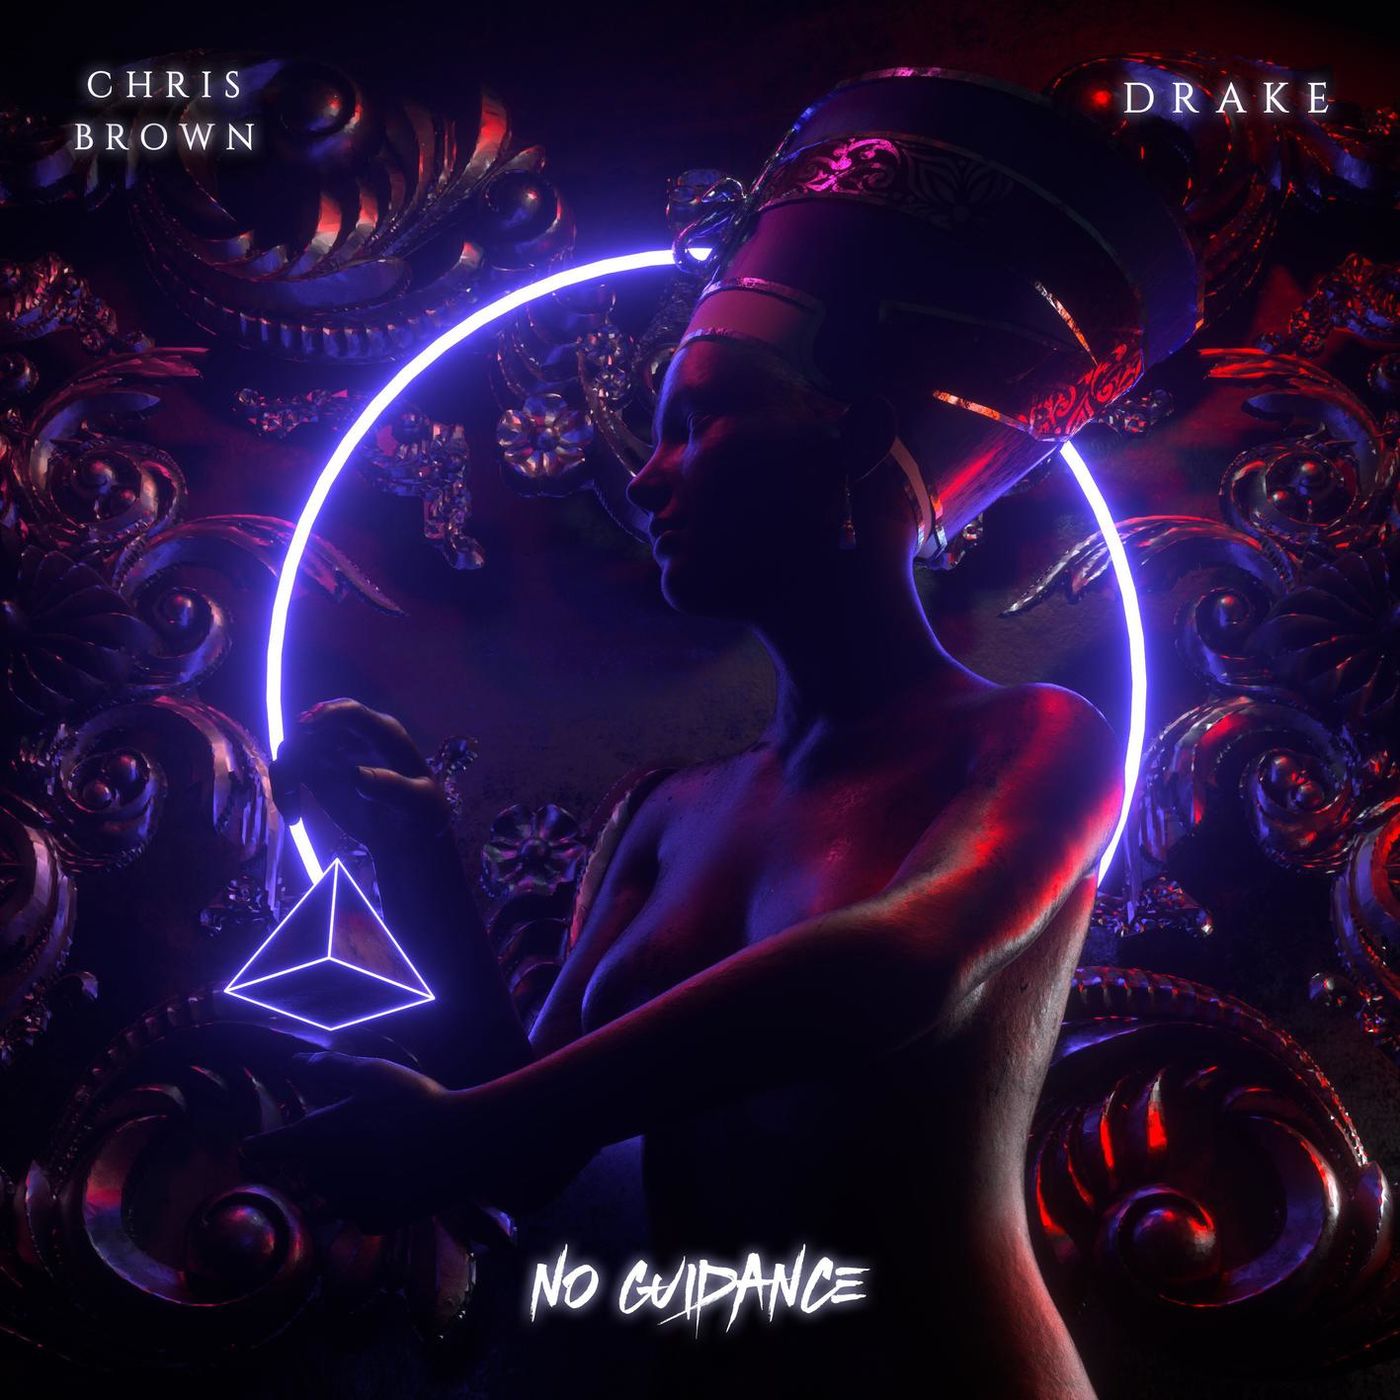 Art for No Guidance by Chris Brown,Drake